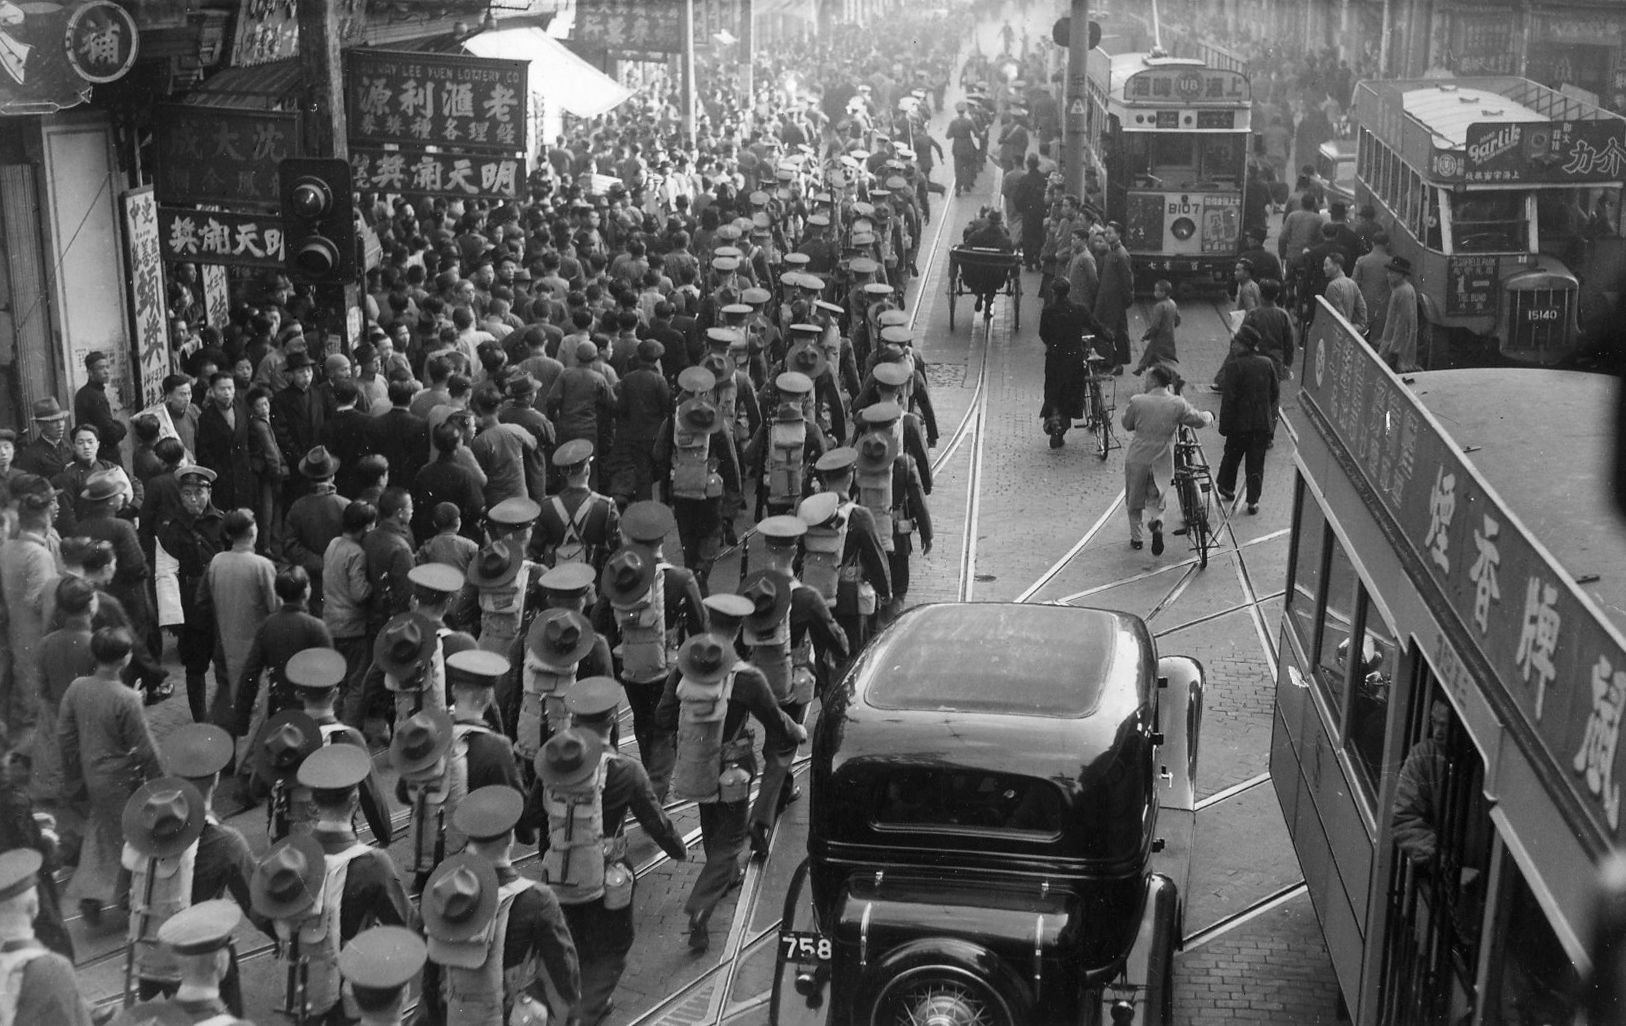 During the uneasy days of the 1930s, a U.S. Marine Corps band marches through the streets of Shanghai. The most cosmopolitan of Chinese cities, Shanghai was home to a large enclave of European and American expatriates. 